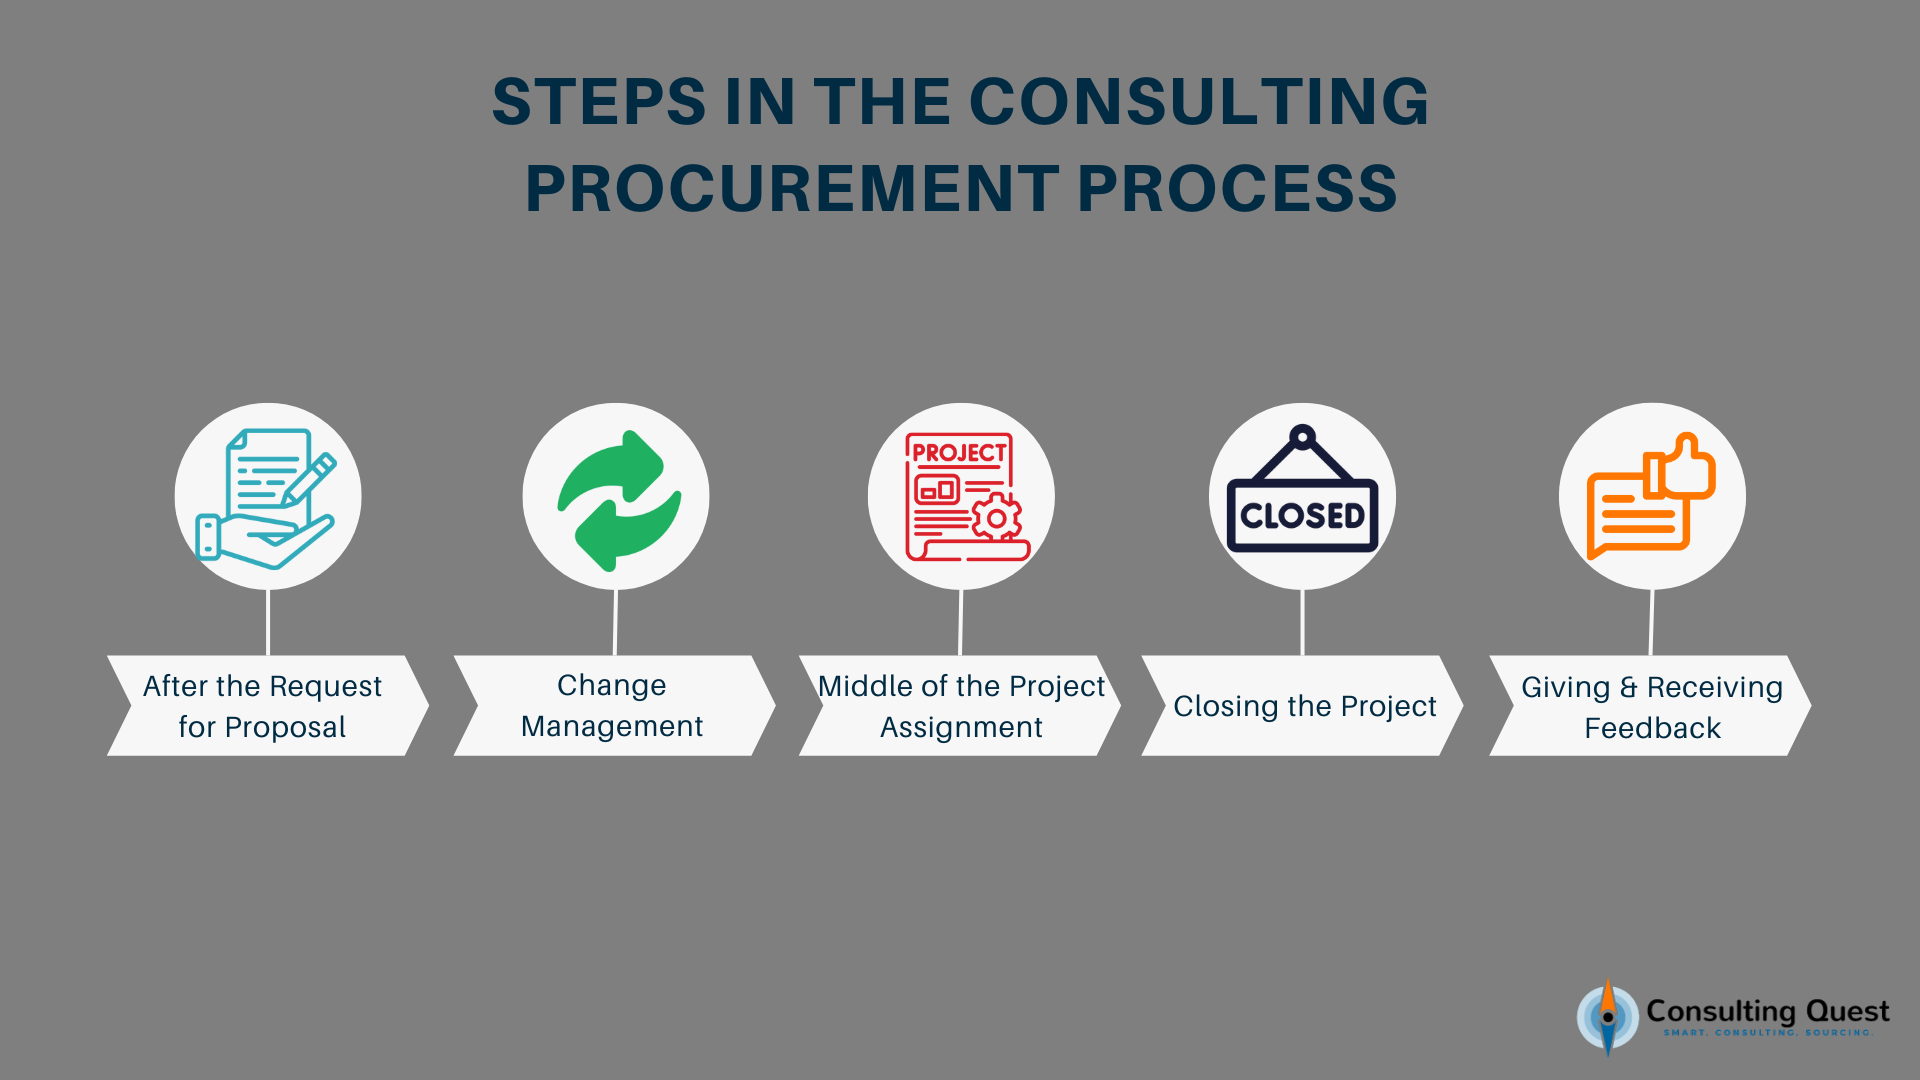 Steps in the consulting procurement process